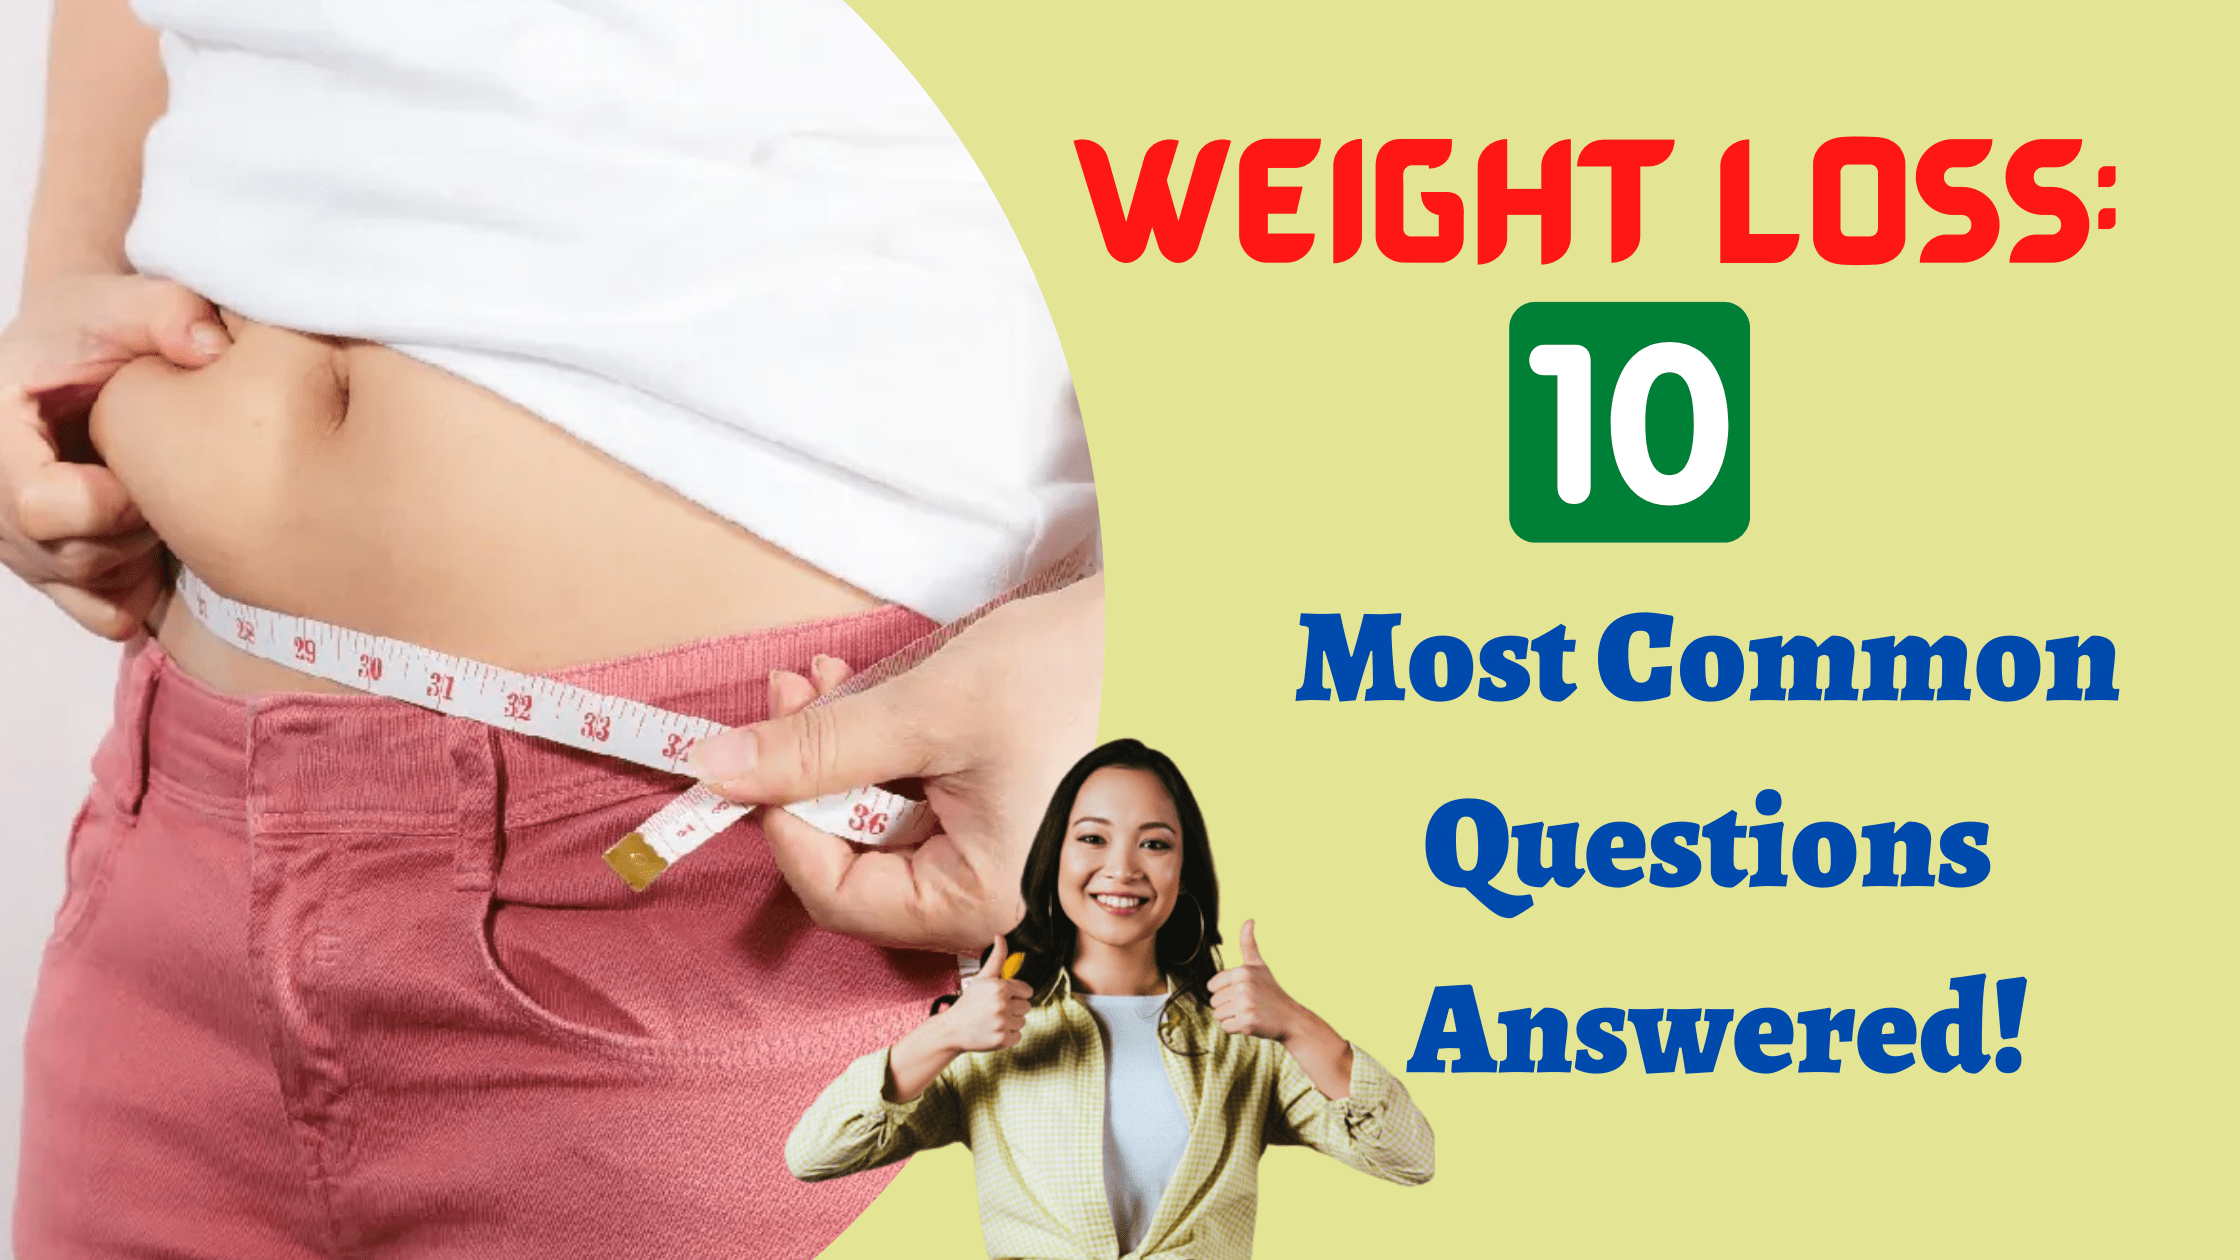 Weight Loss 10 Most Common Questions Answered!